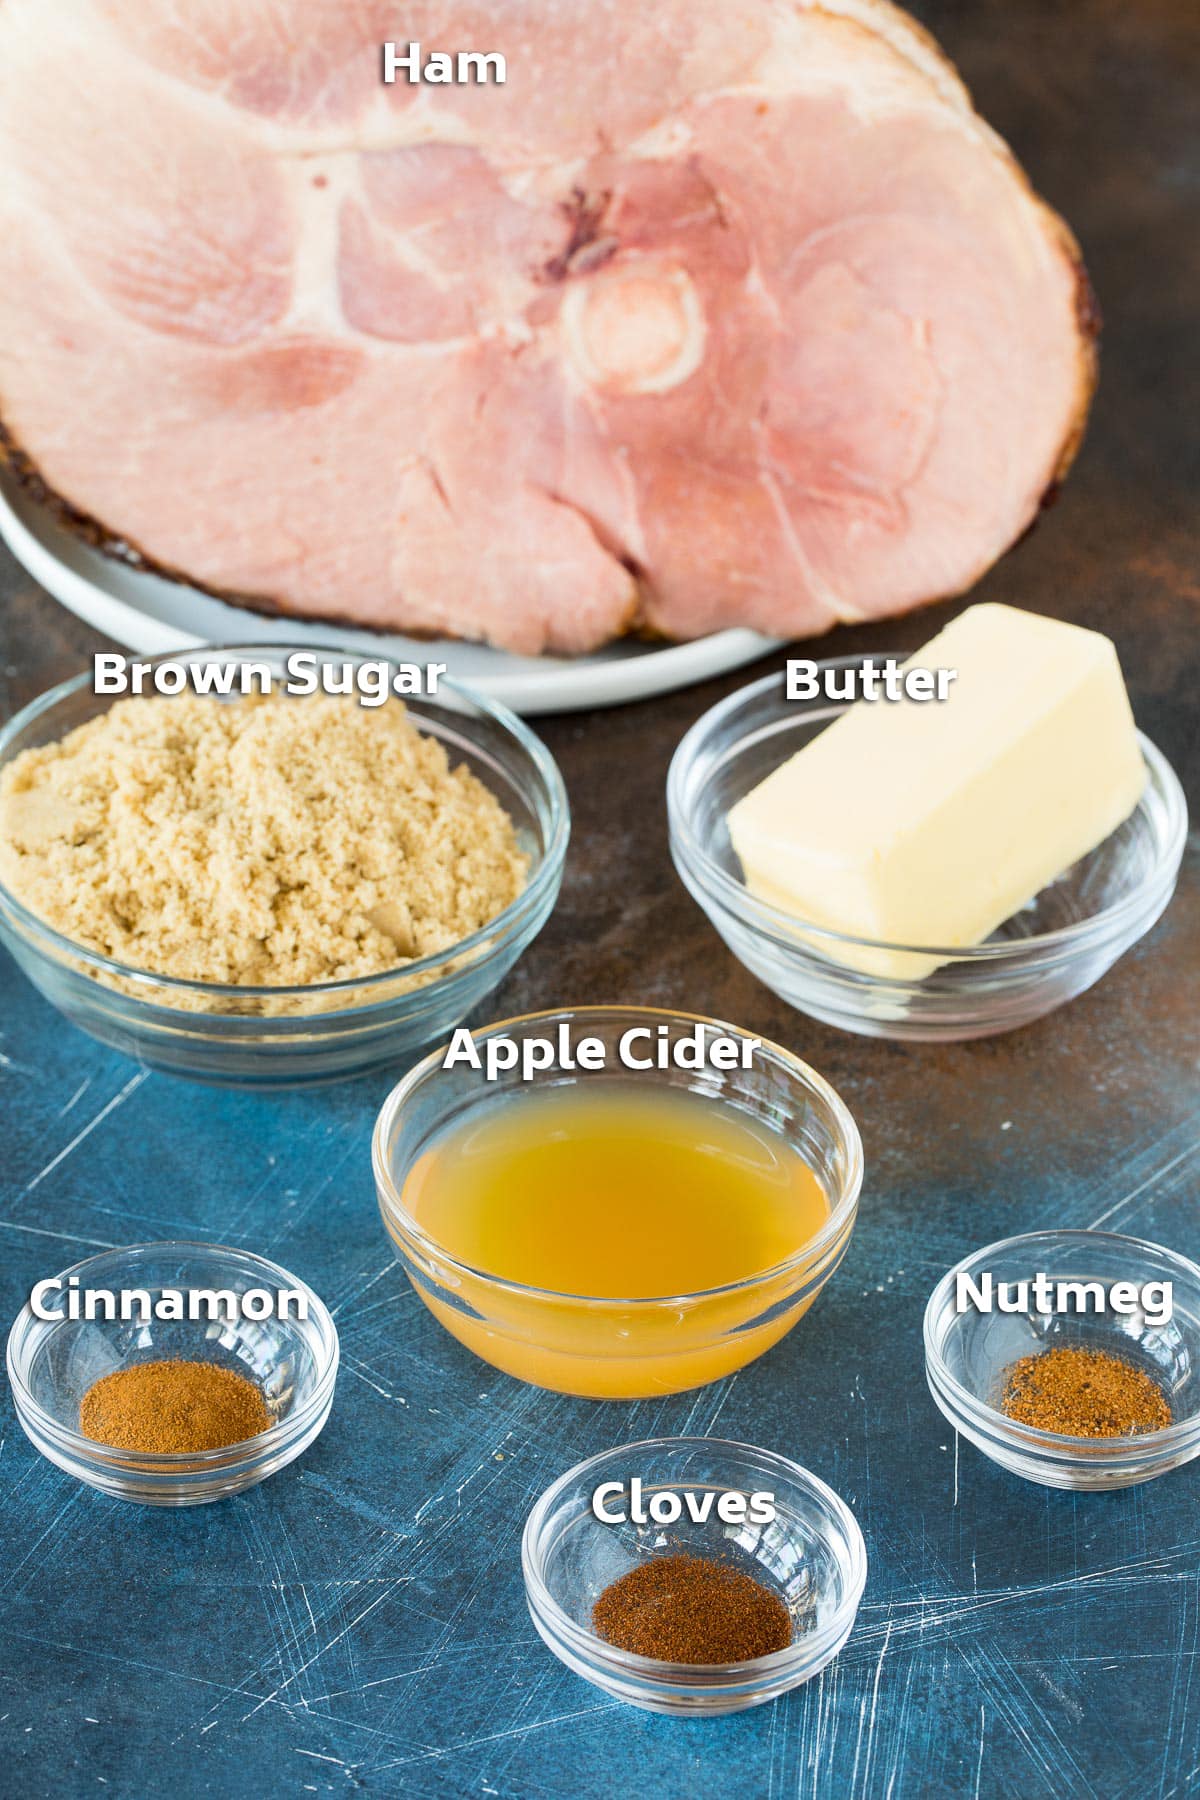 Ingredients including ham, brown sugar, butter and spices.